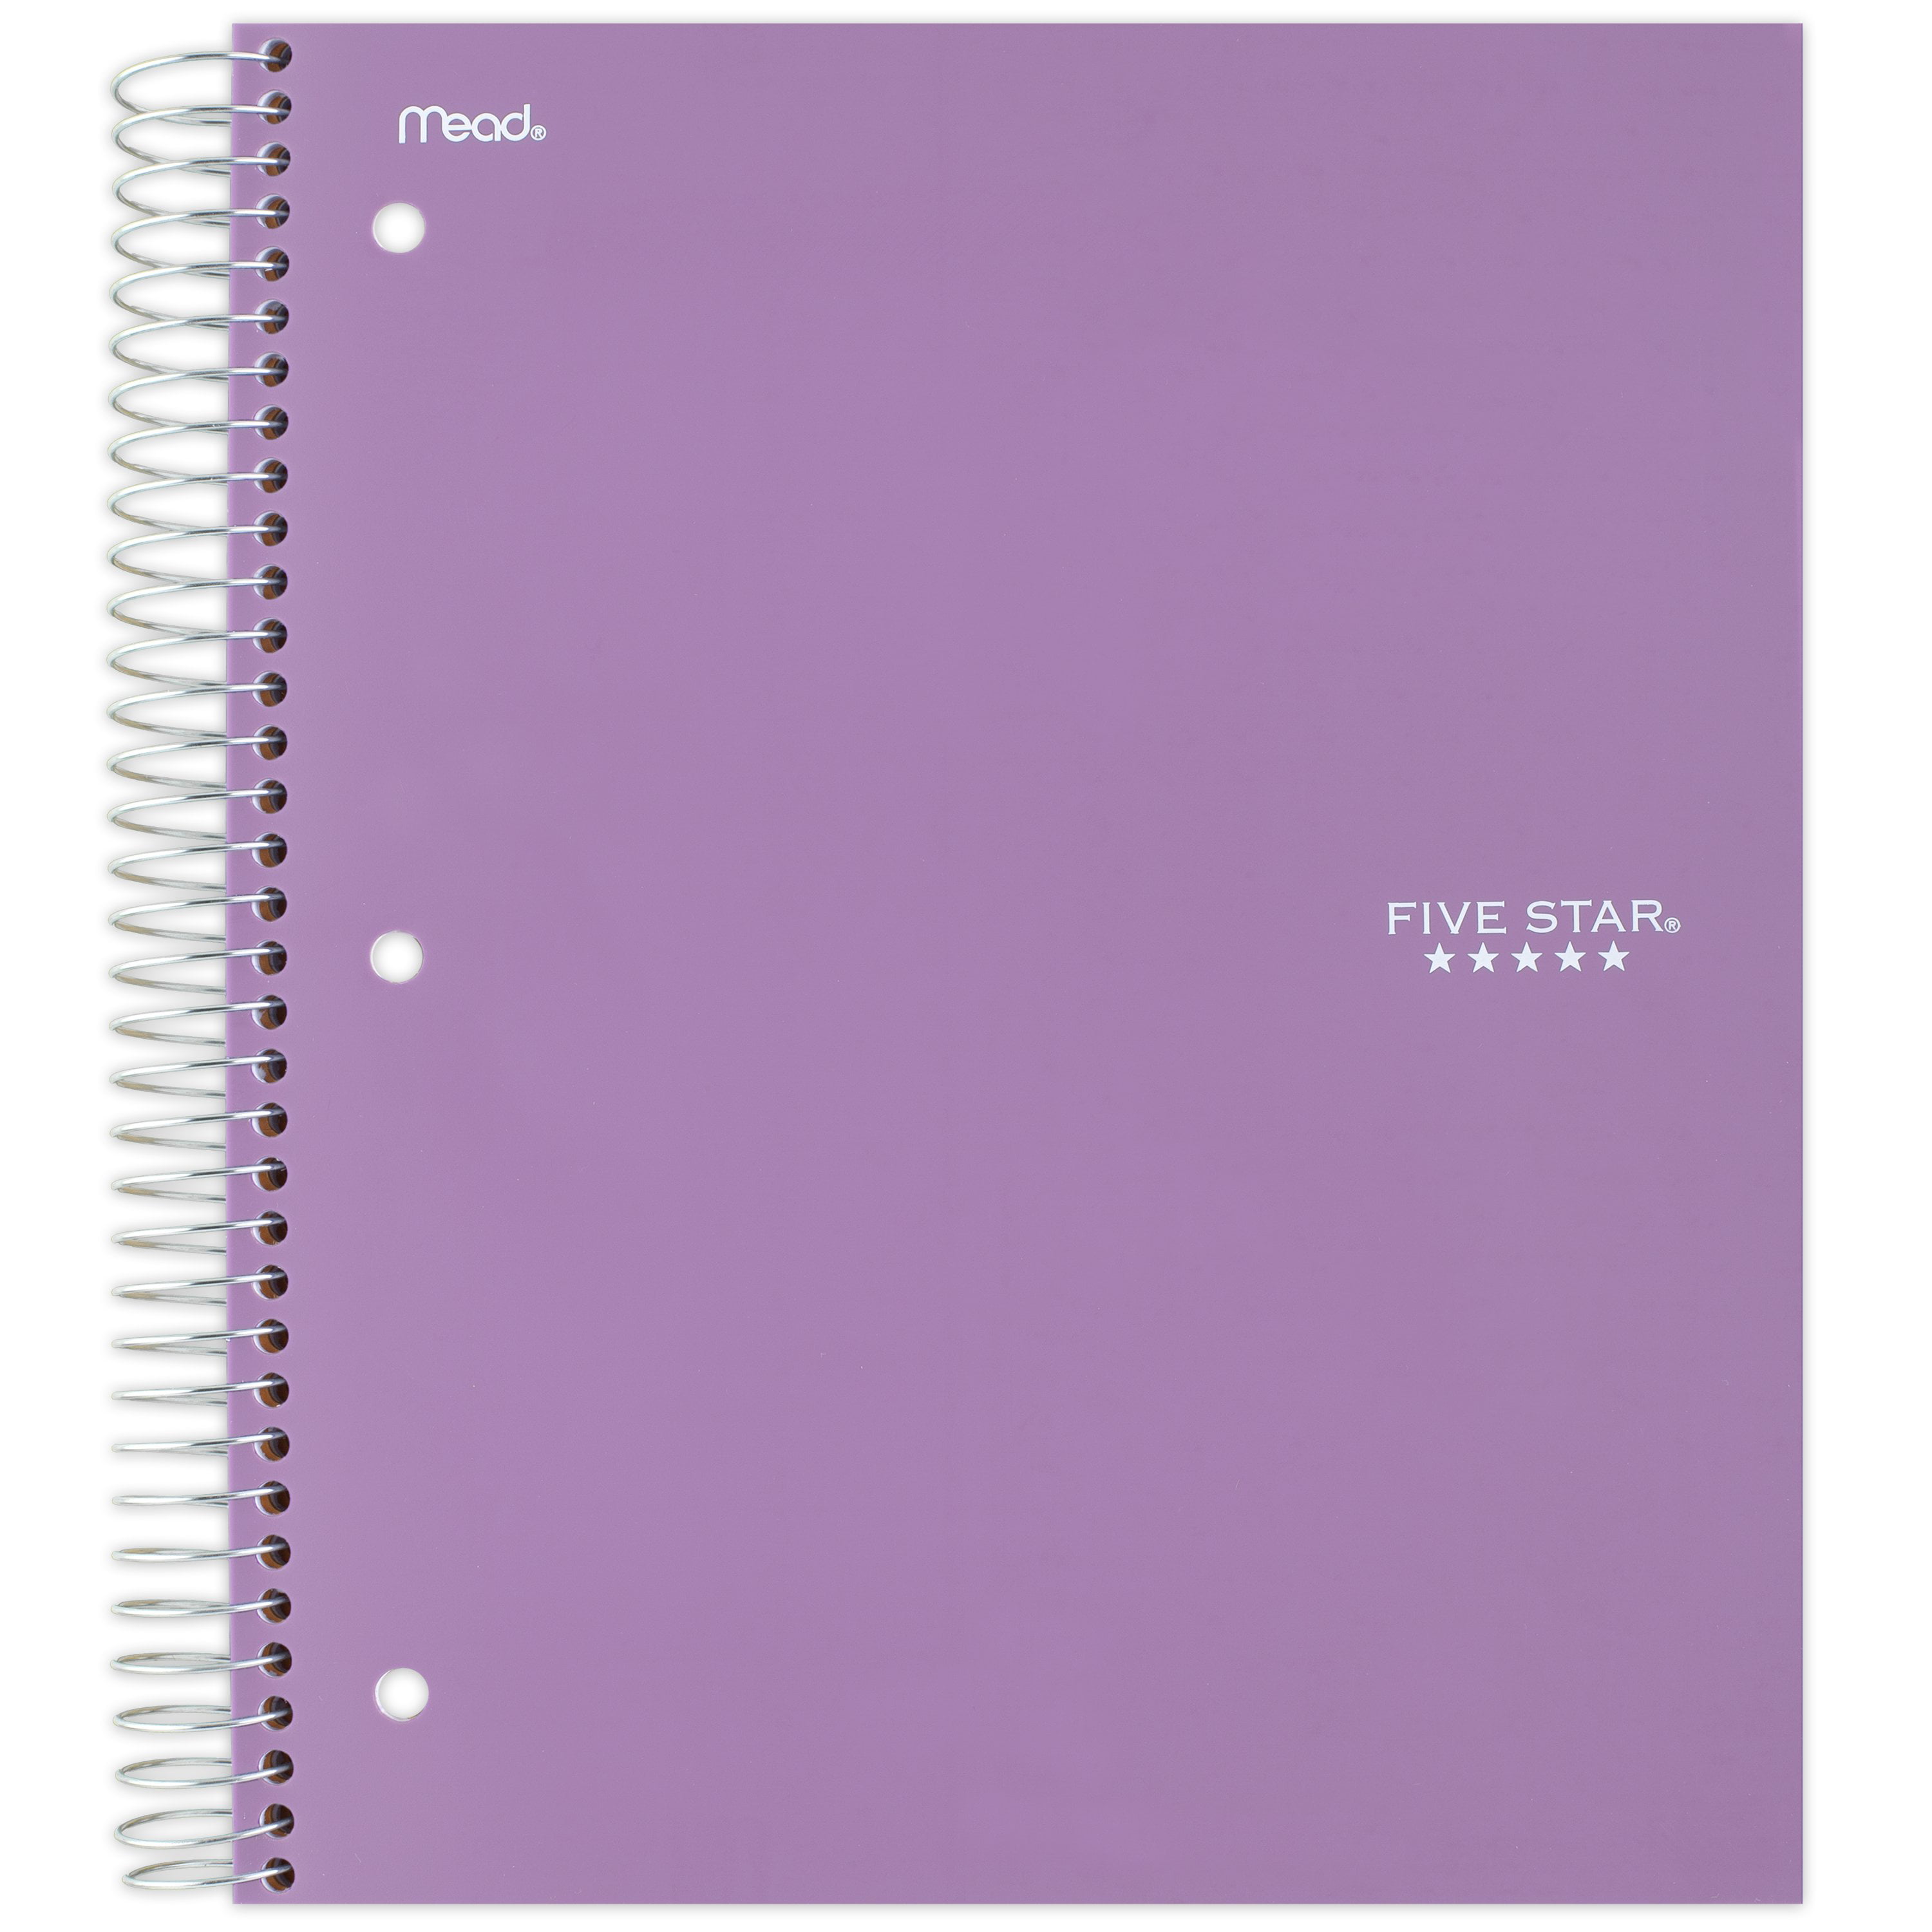 Pastel Purple A5 Notebook Lined Pages Hardback Medium Journal New Notepad Note Book Notes Diary Pad